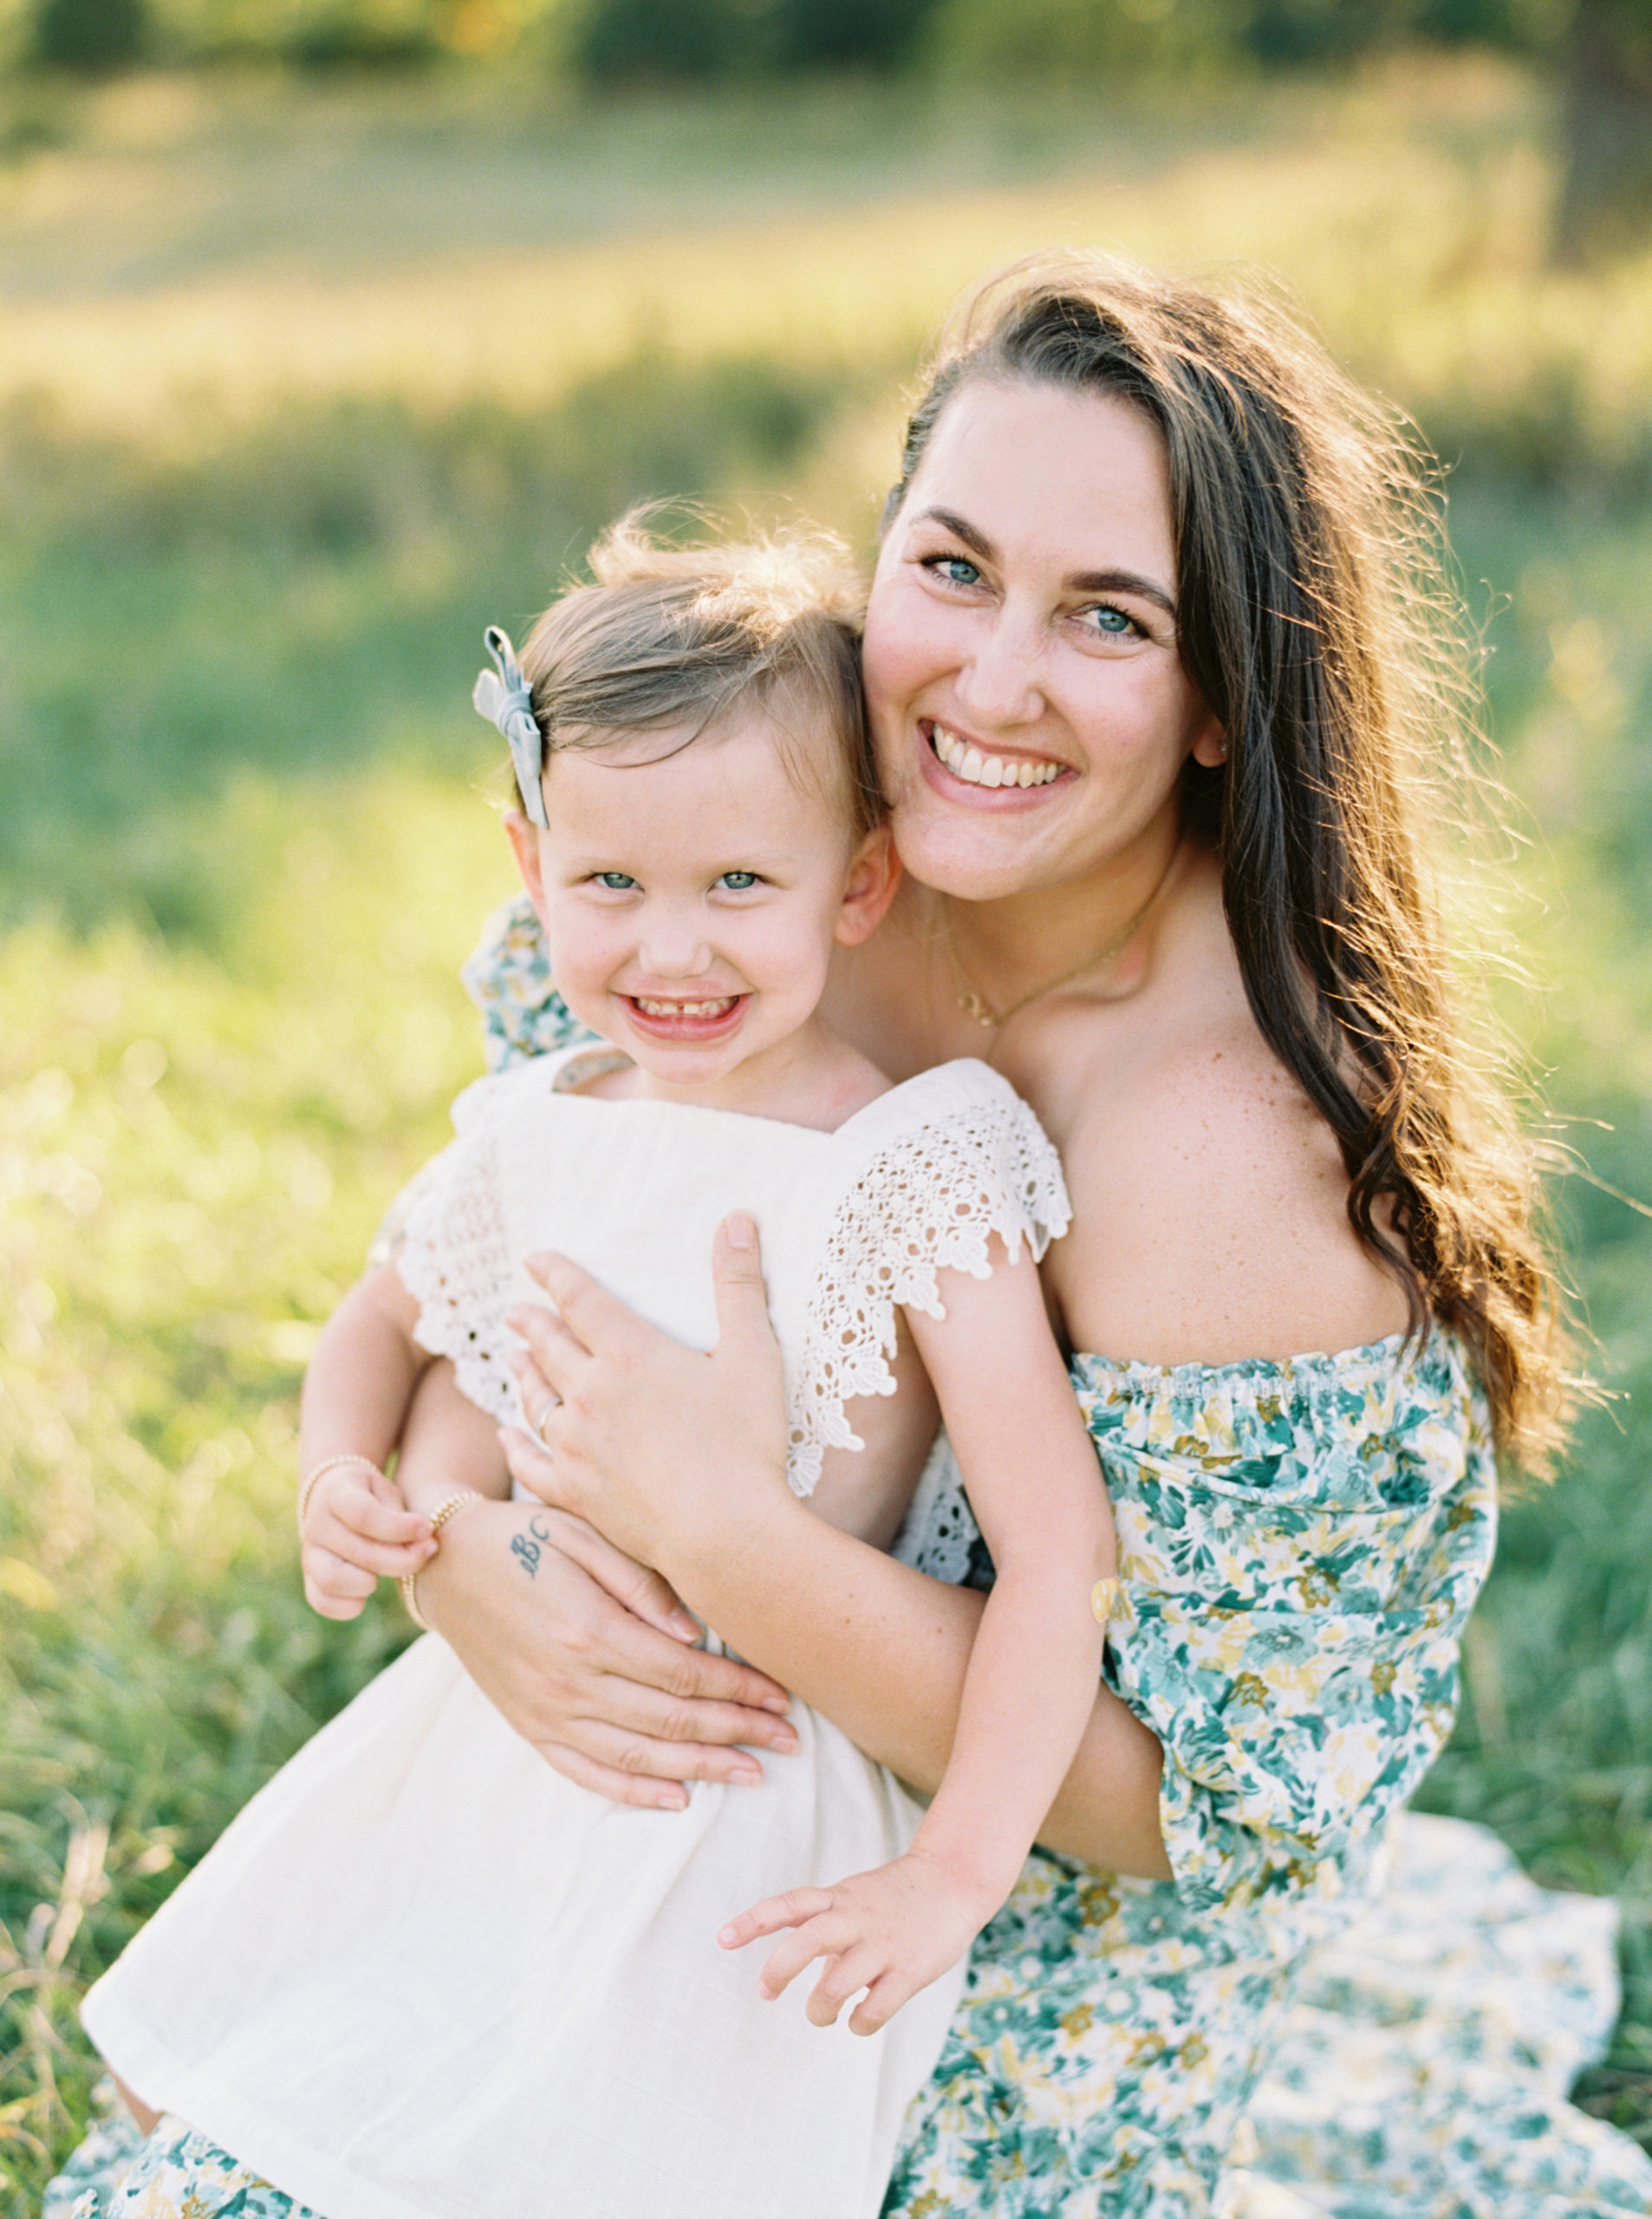 Mother and daughter cuddle in a grassy green field setting in Shorewood in the summer